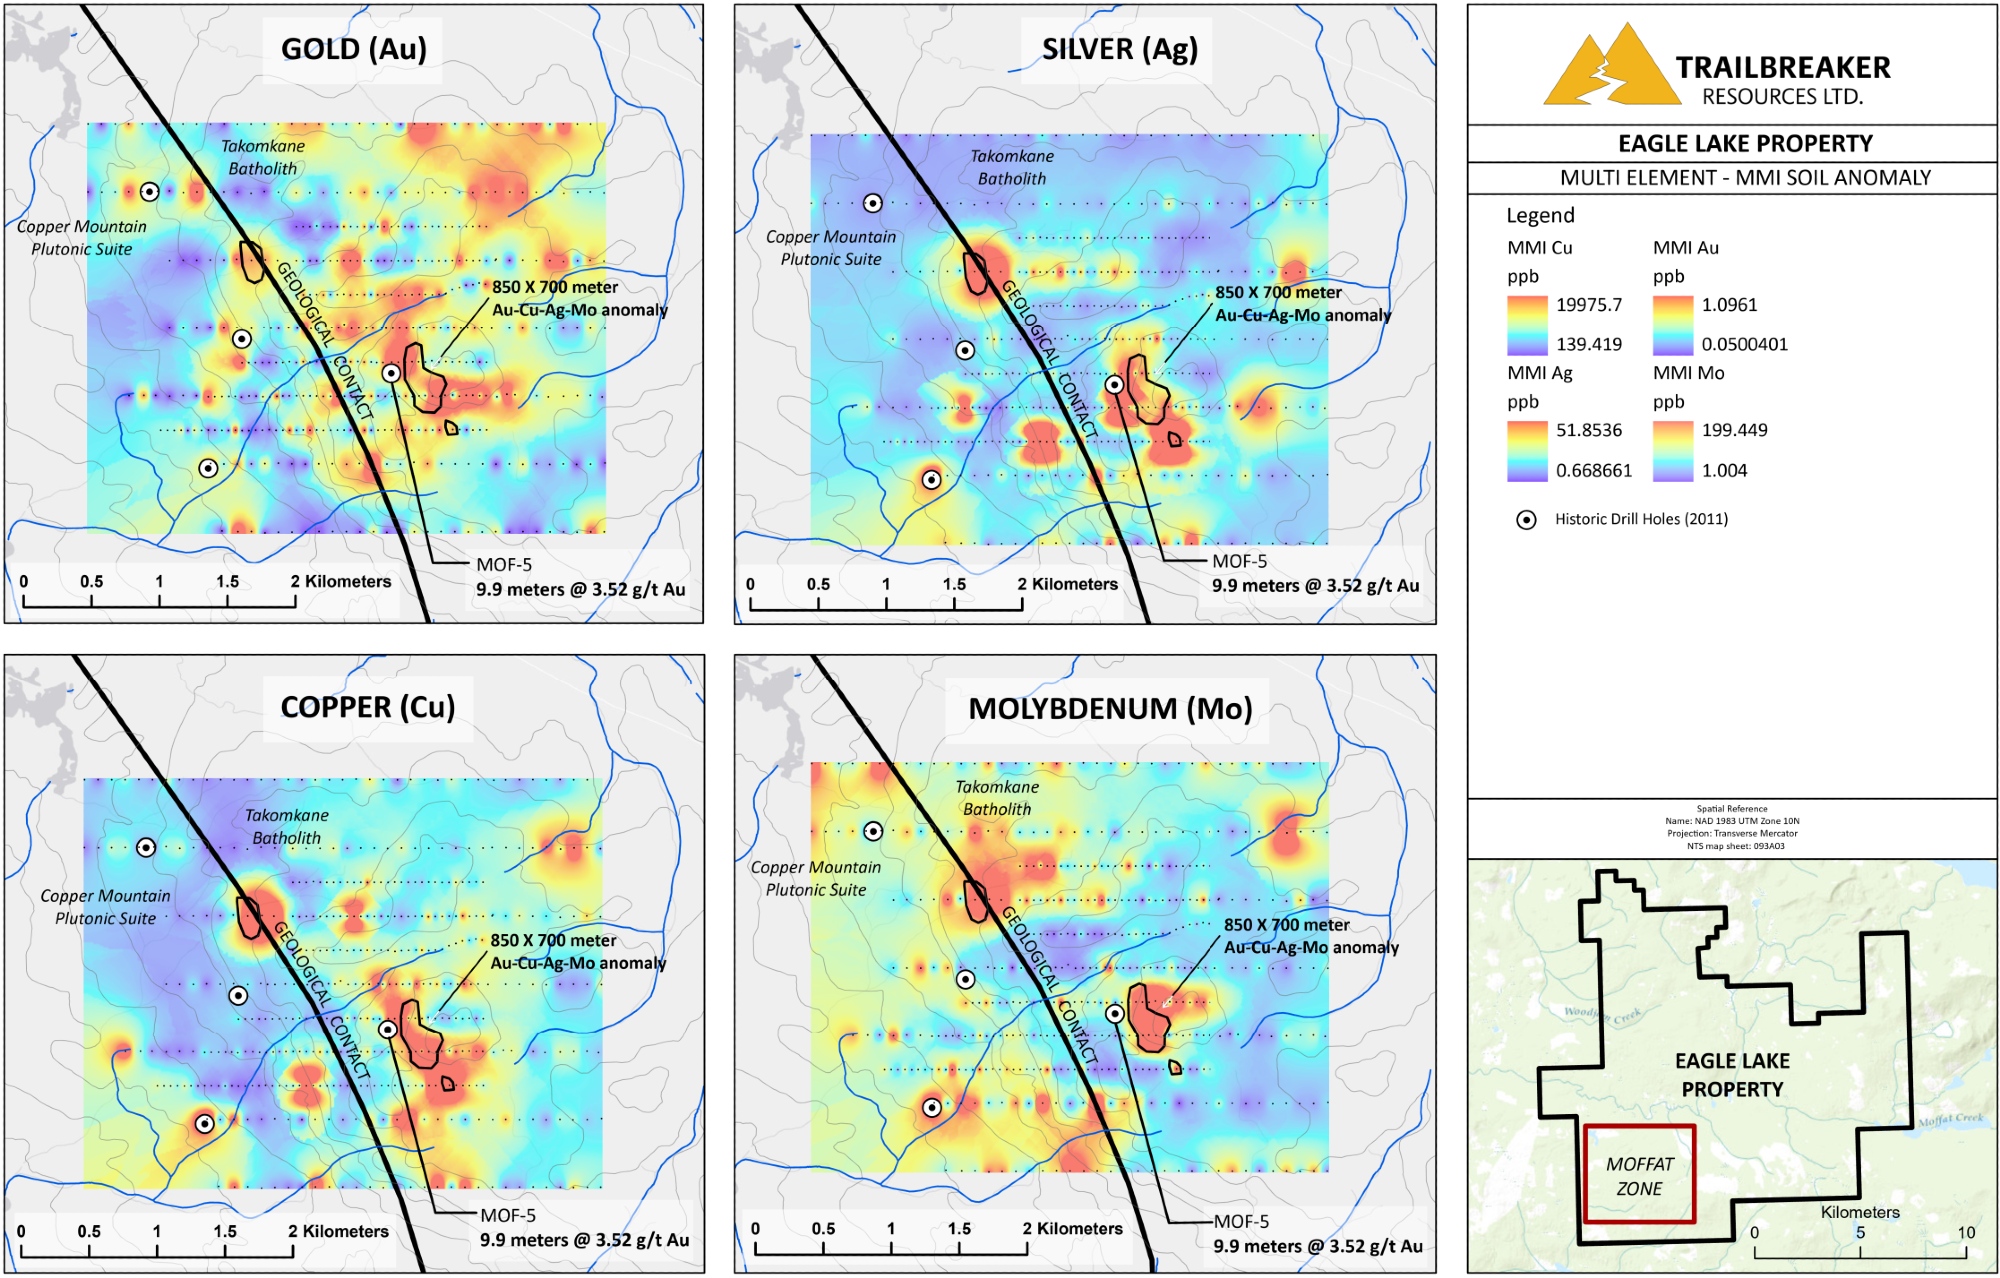 At the Eagle Lake site in south-central British Columbia, Trailbreaker Resources Ltd. has reported the conclusion and outcomes of its Phase 1 exploration program.